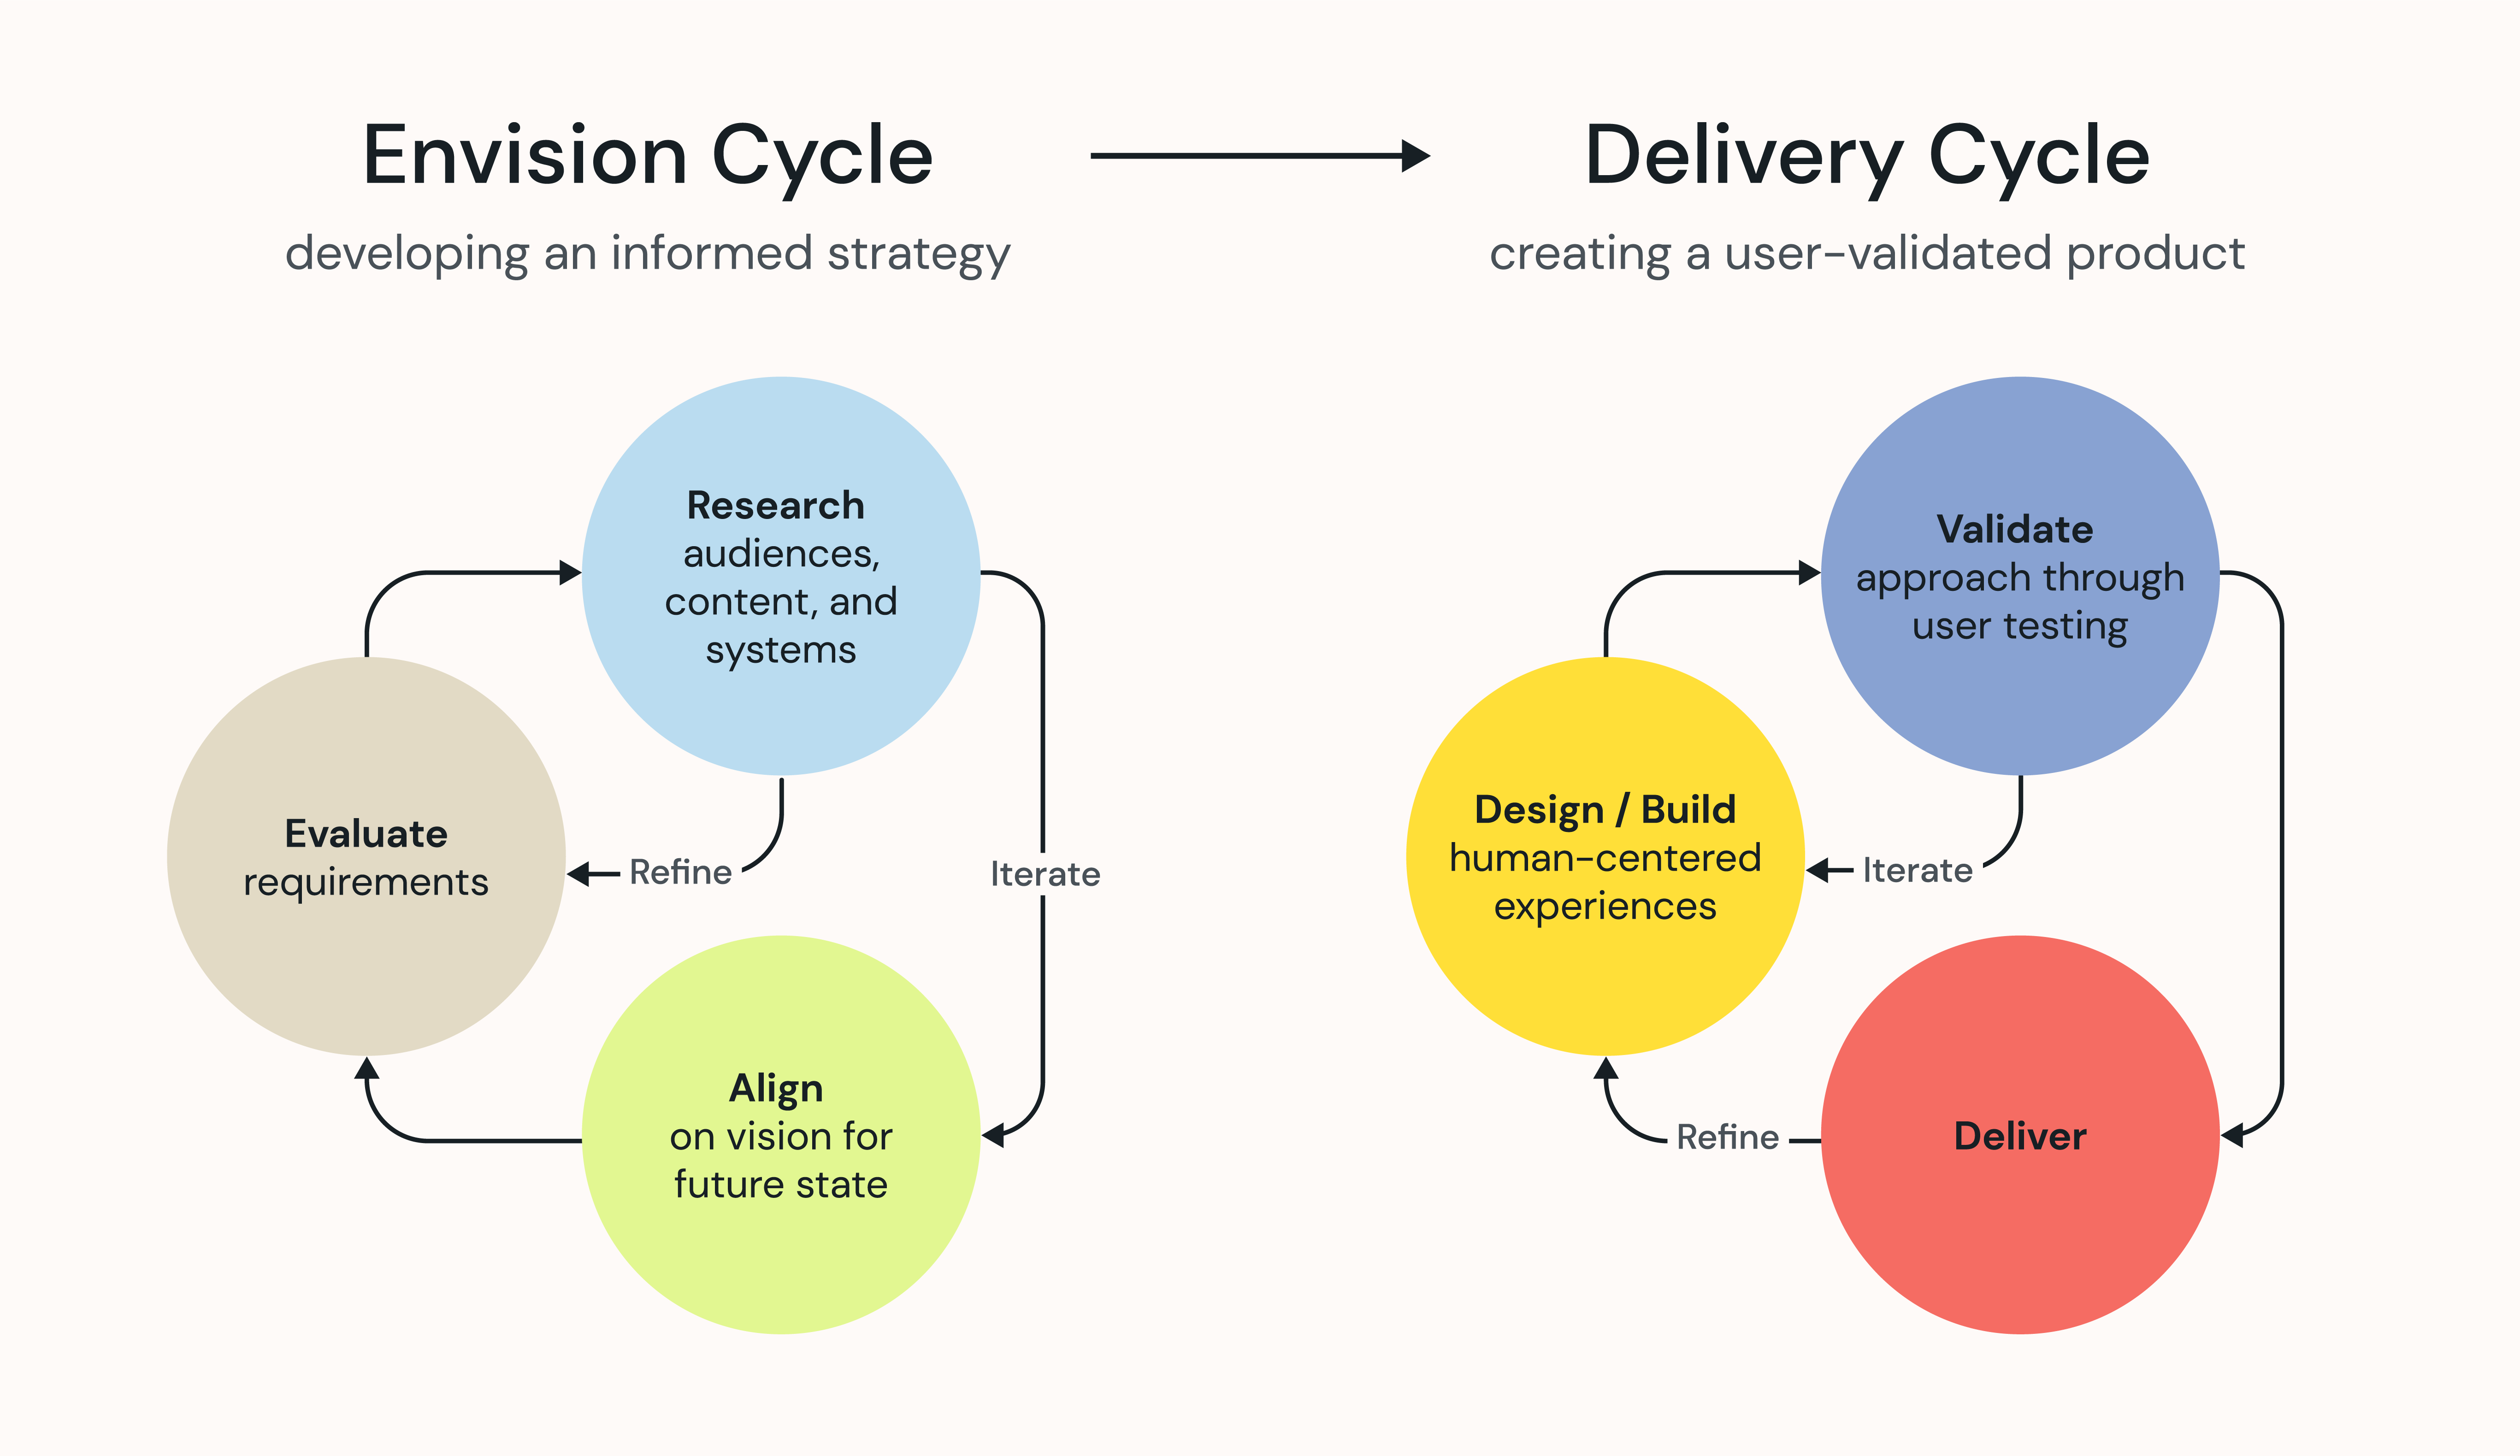 Image depicting an iterative design and build process, emphasizing a relationship between two primary cycles- one for planning, aligning, envisioning, and strategizing the product and another for designing, testing, building, and delivering the final product.